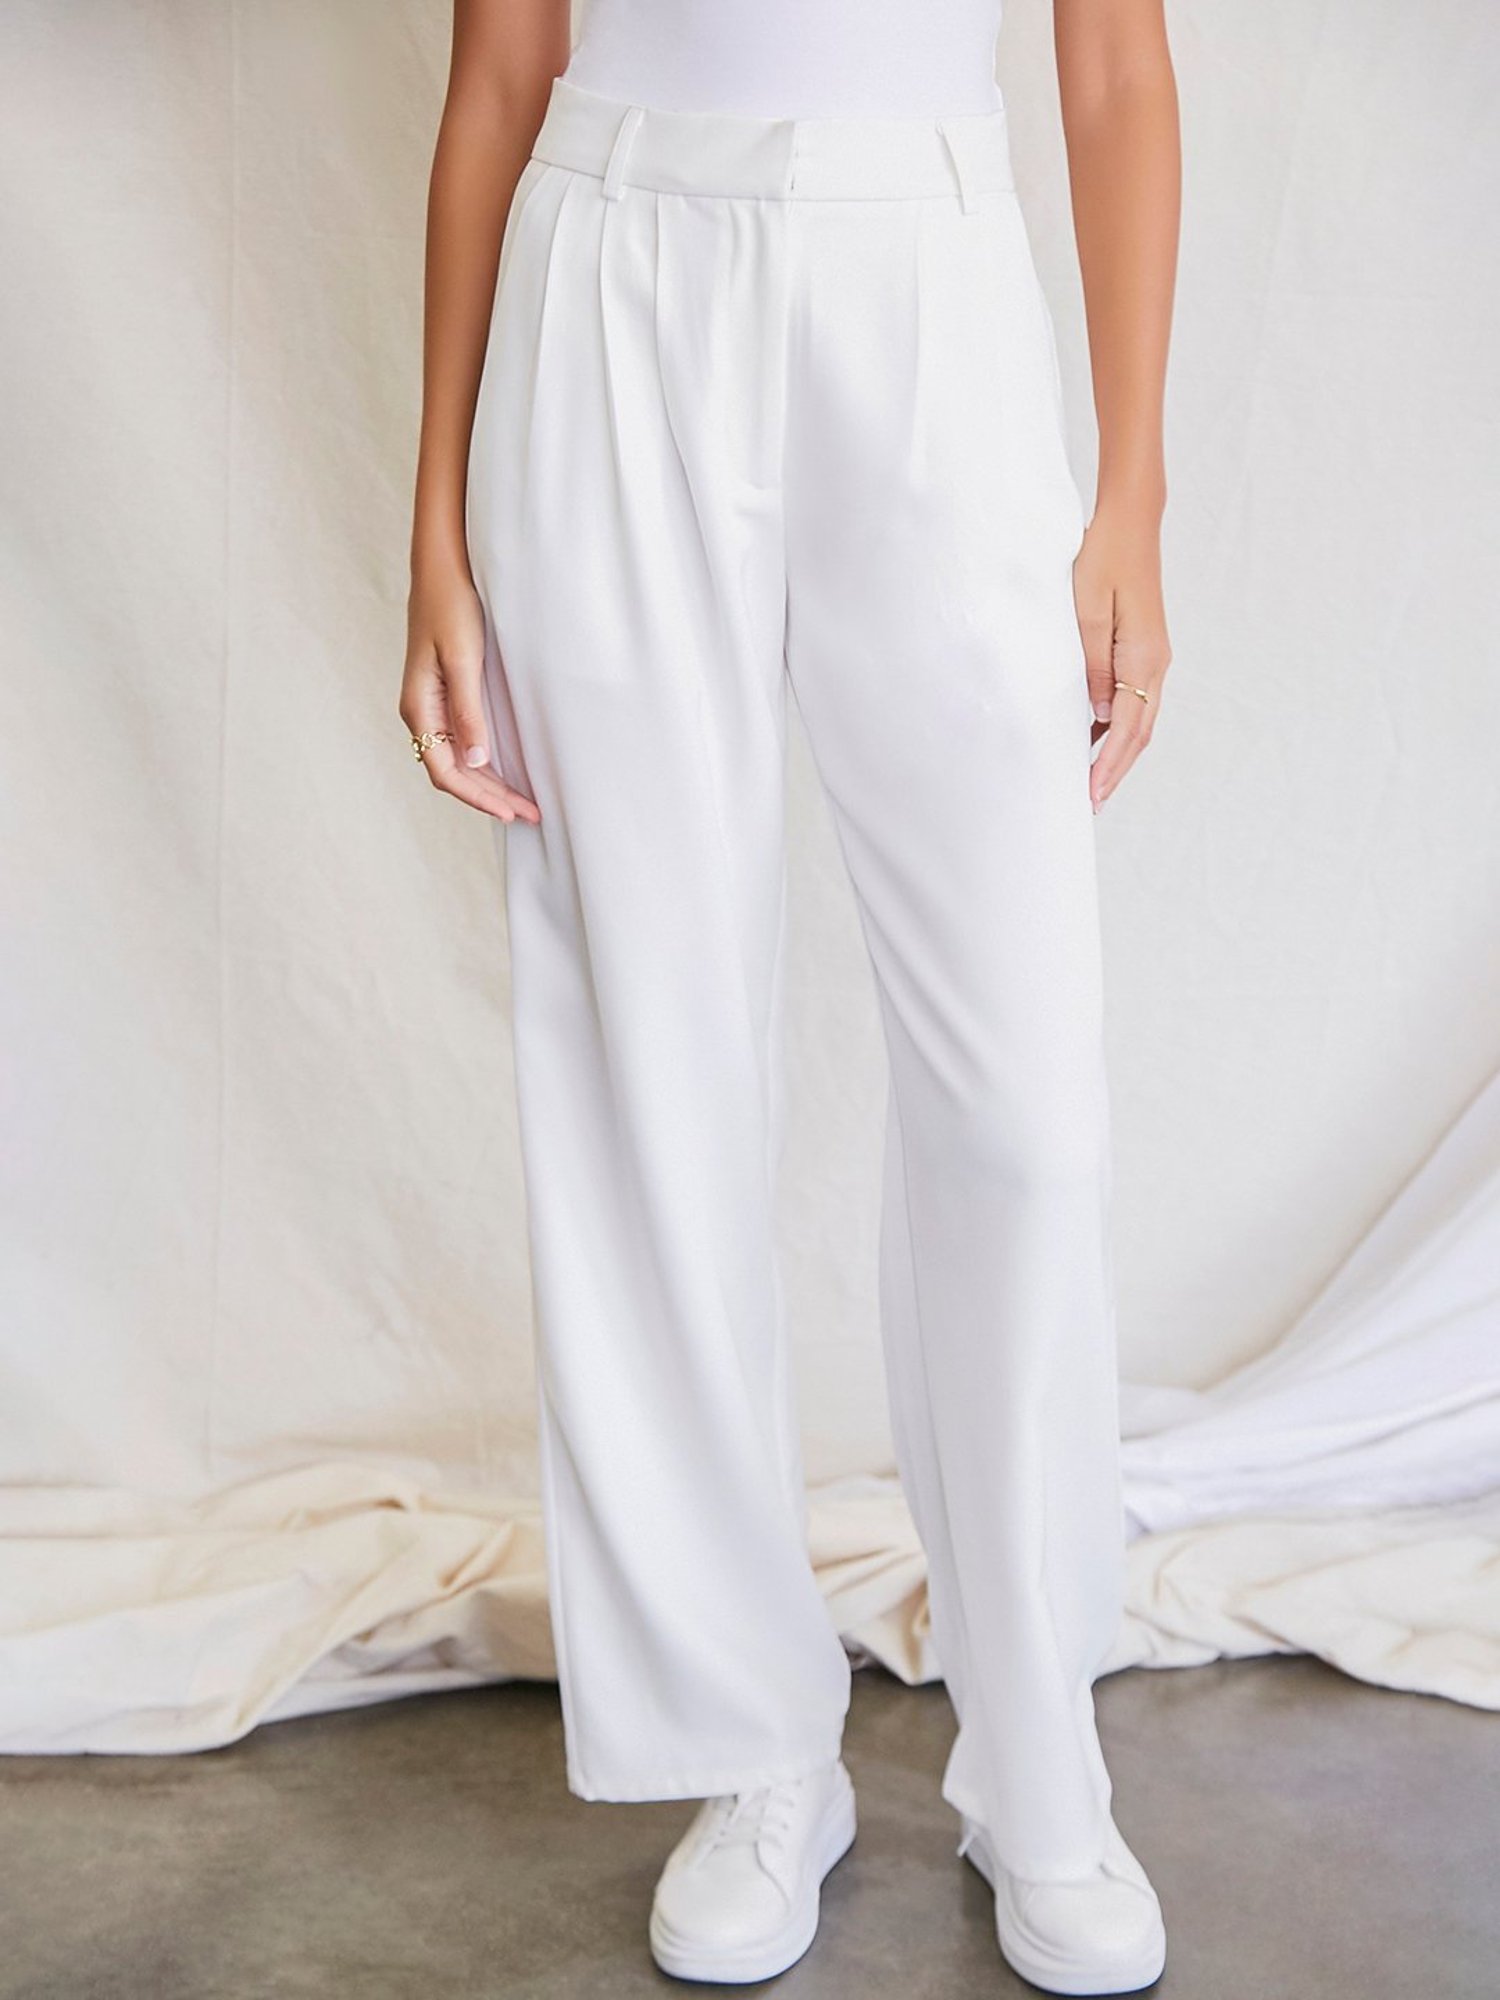 Forever 21 Trousers and Pants  Buy Forever 21 Solid White Trousers Online   Nykaa Fashion